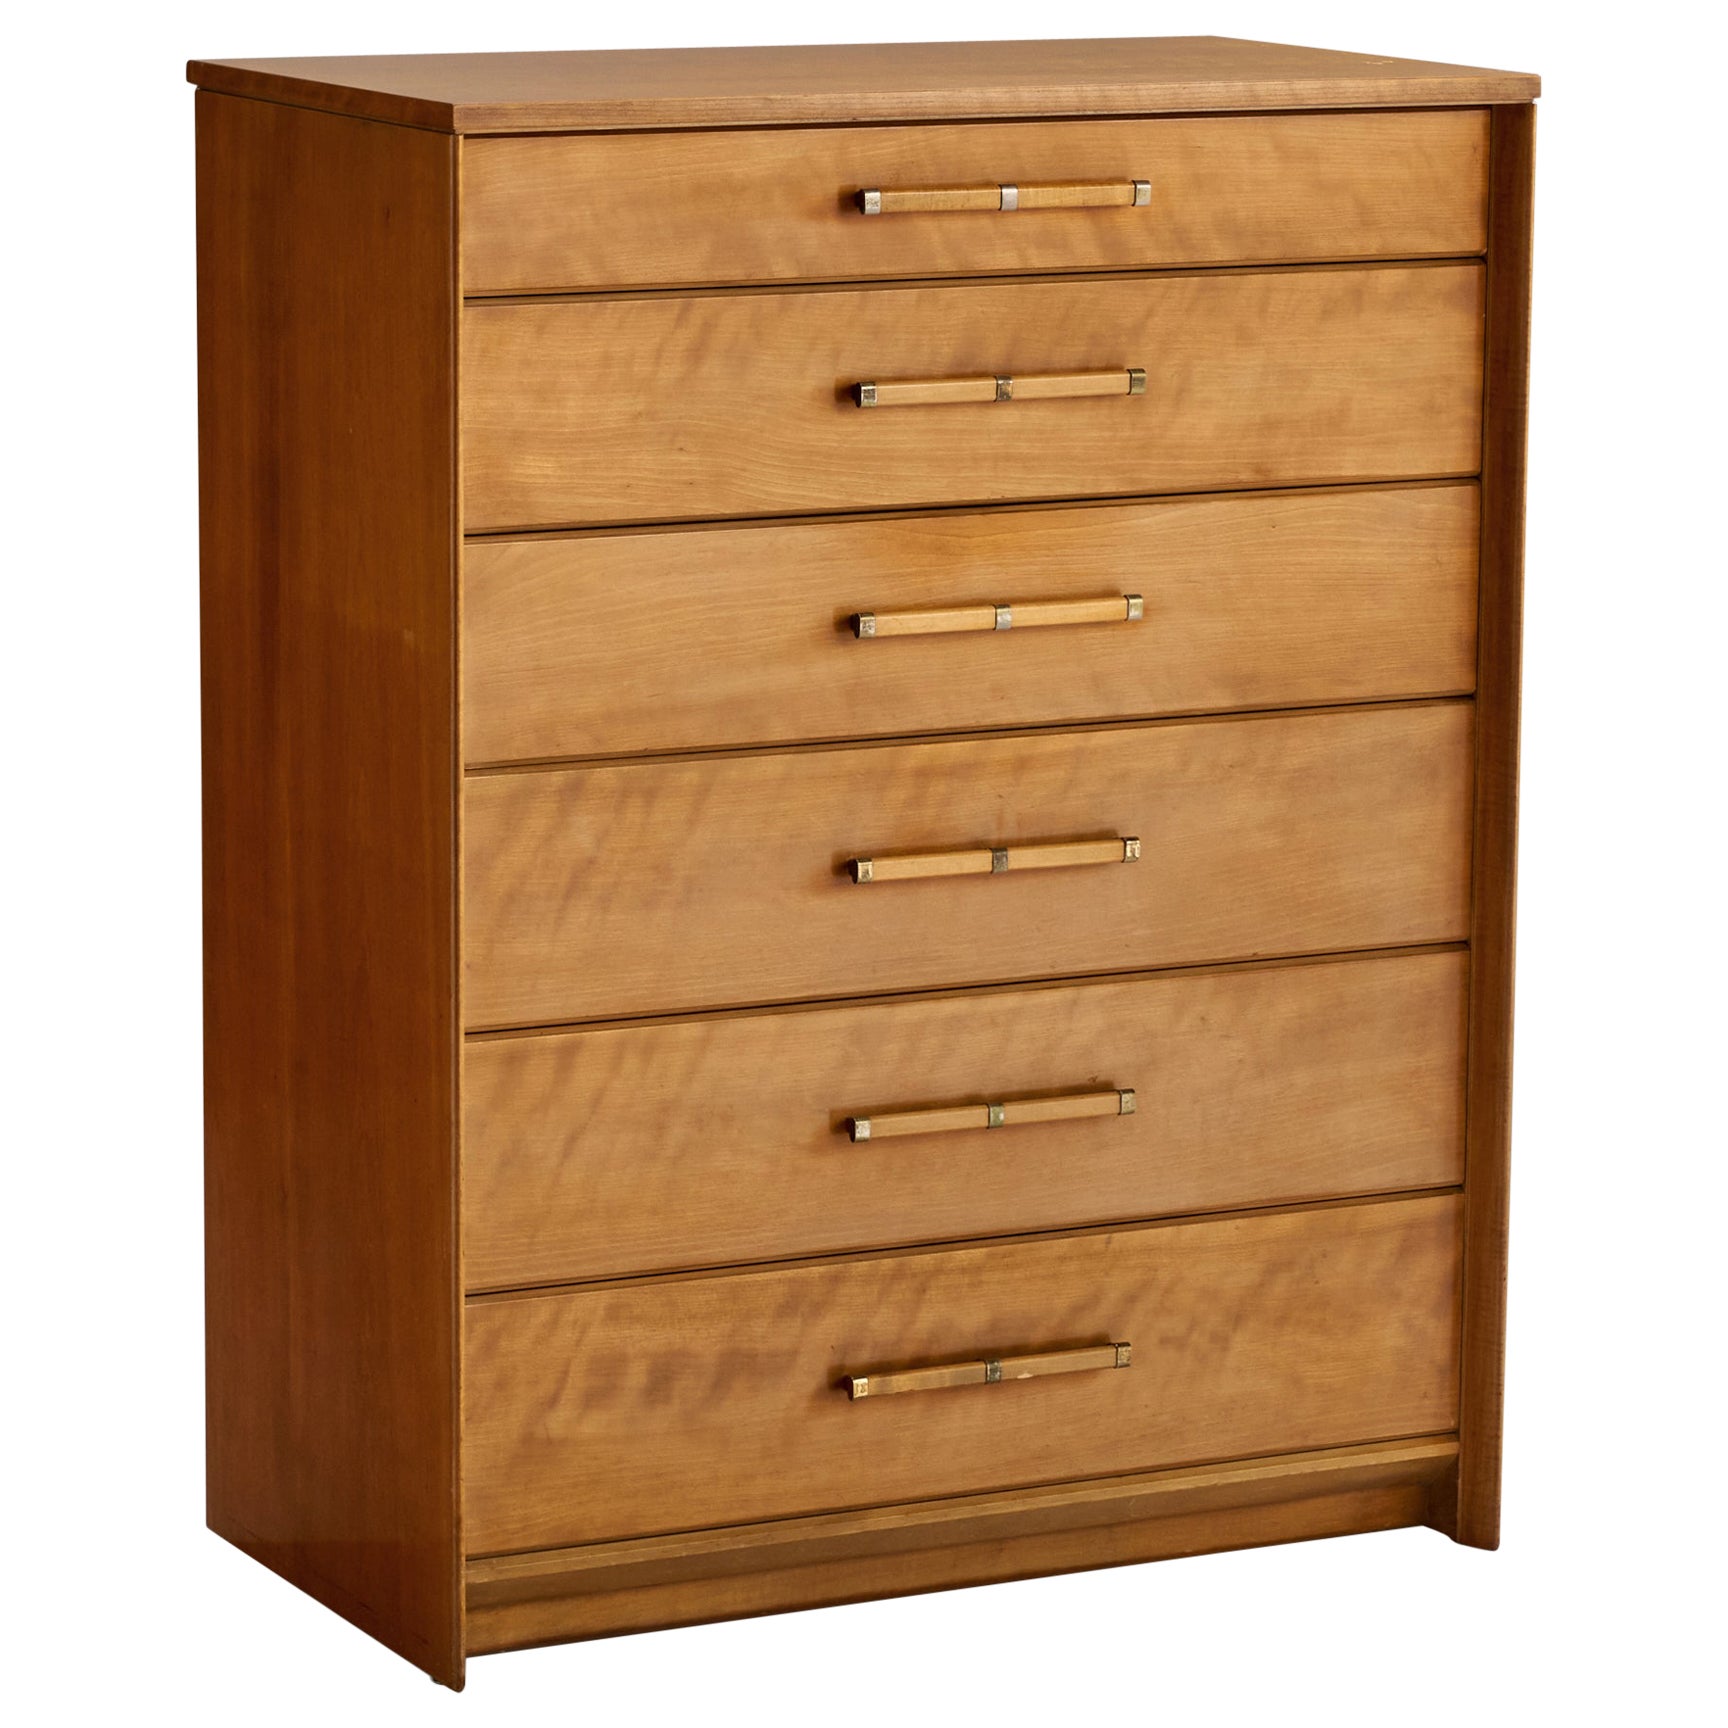 Renzo Rutili, Chest of Drawers, Maple, Brass, USA, 1940s For Sale